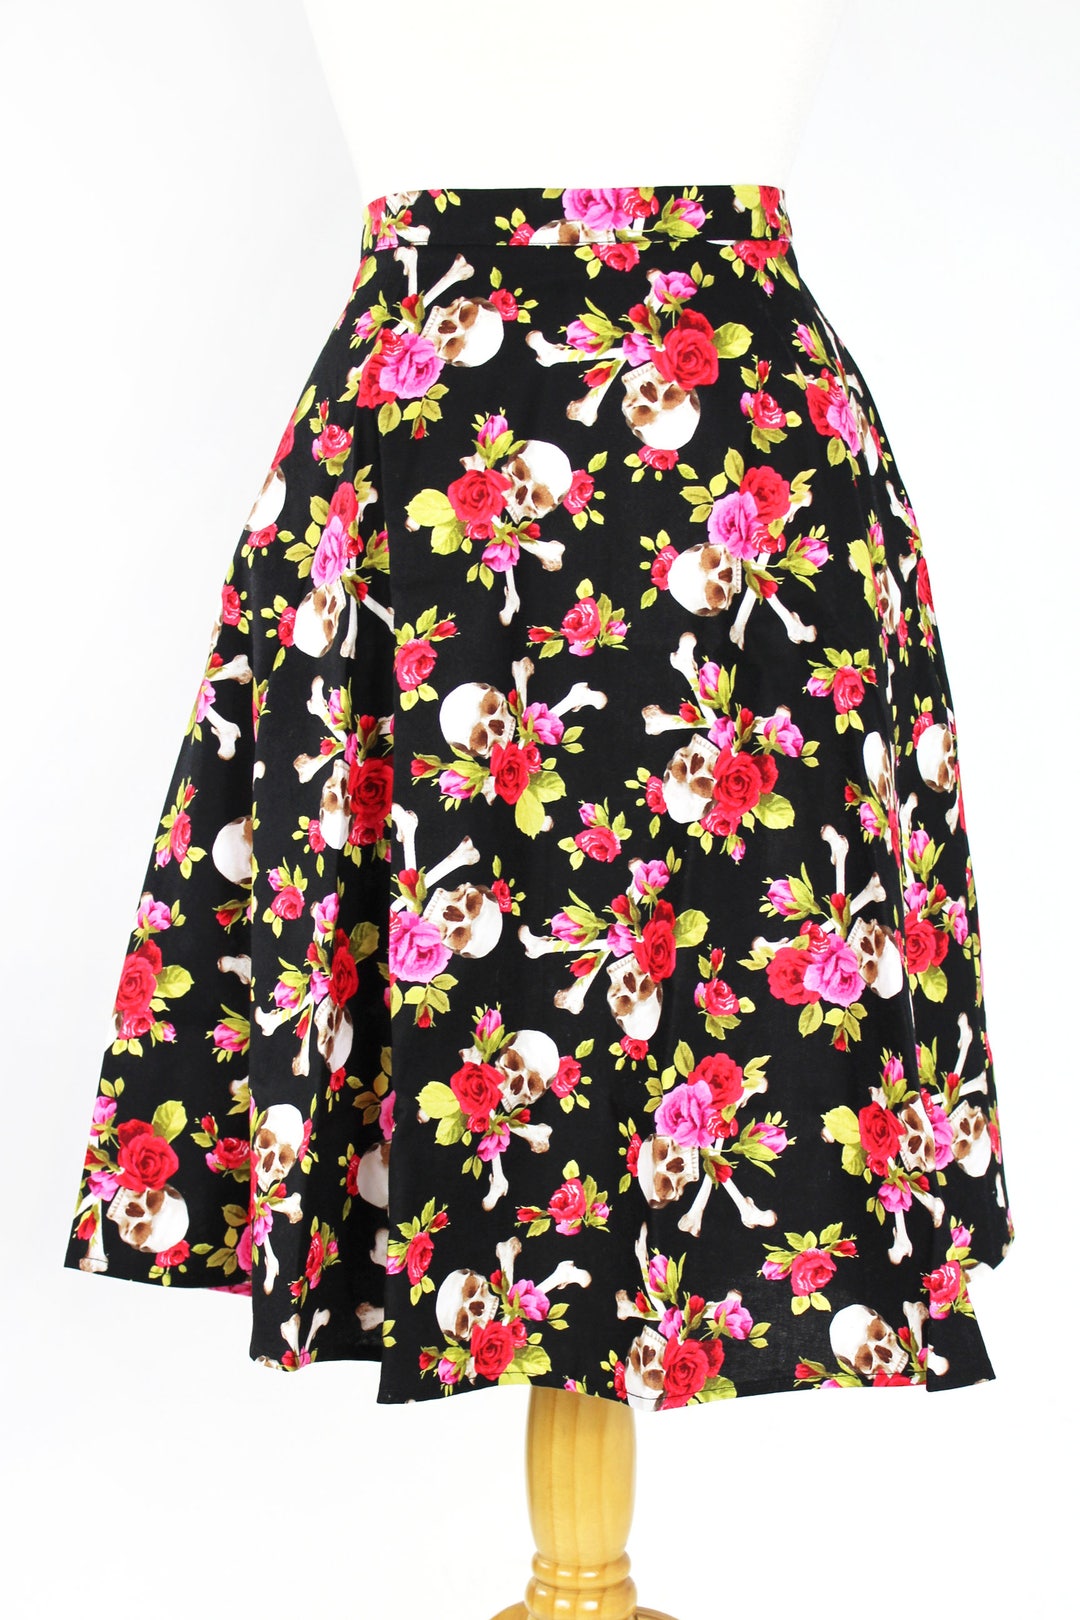 Pink Skulls and Roses Aline Pinup Skirt - Etsy